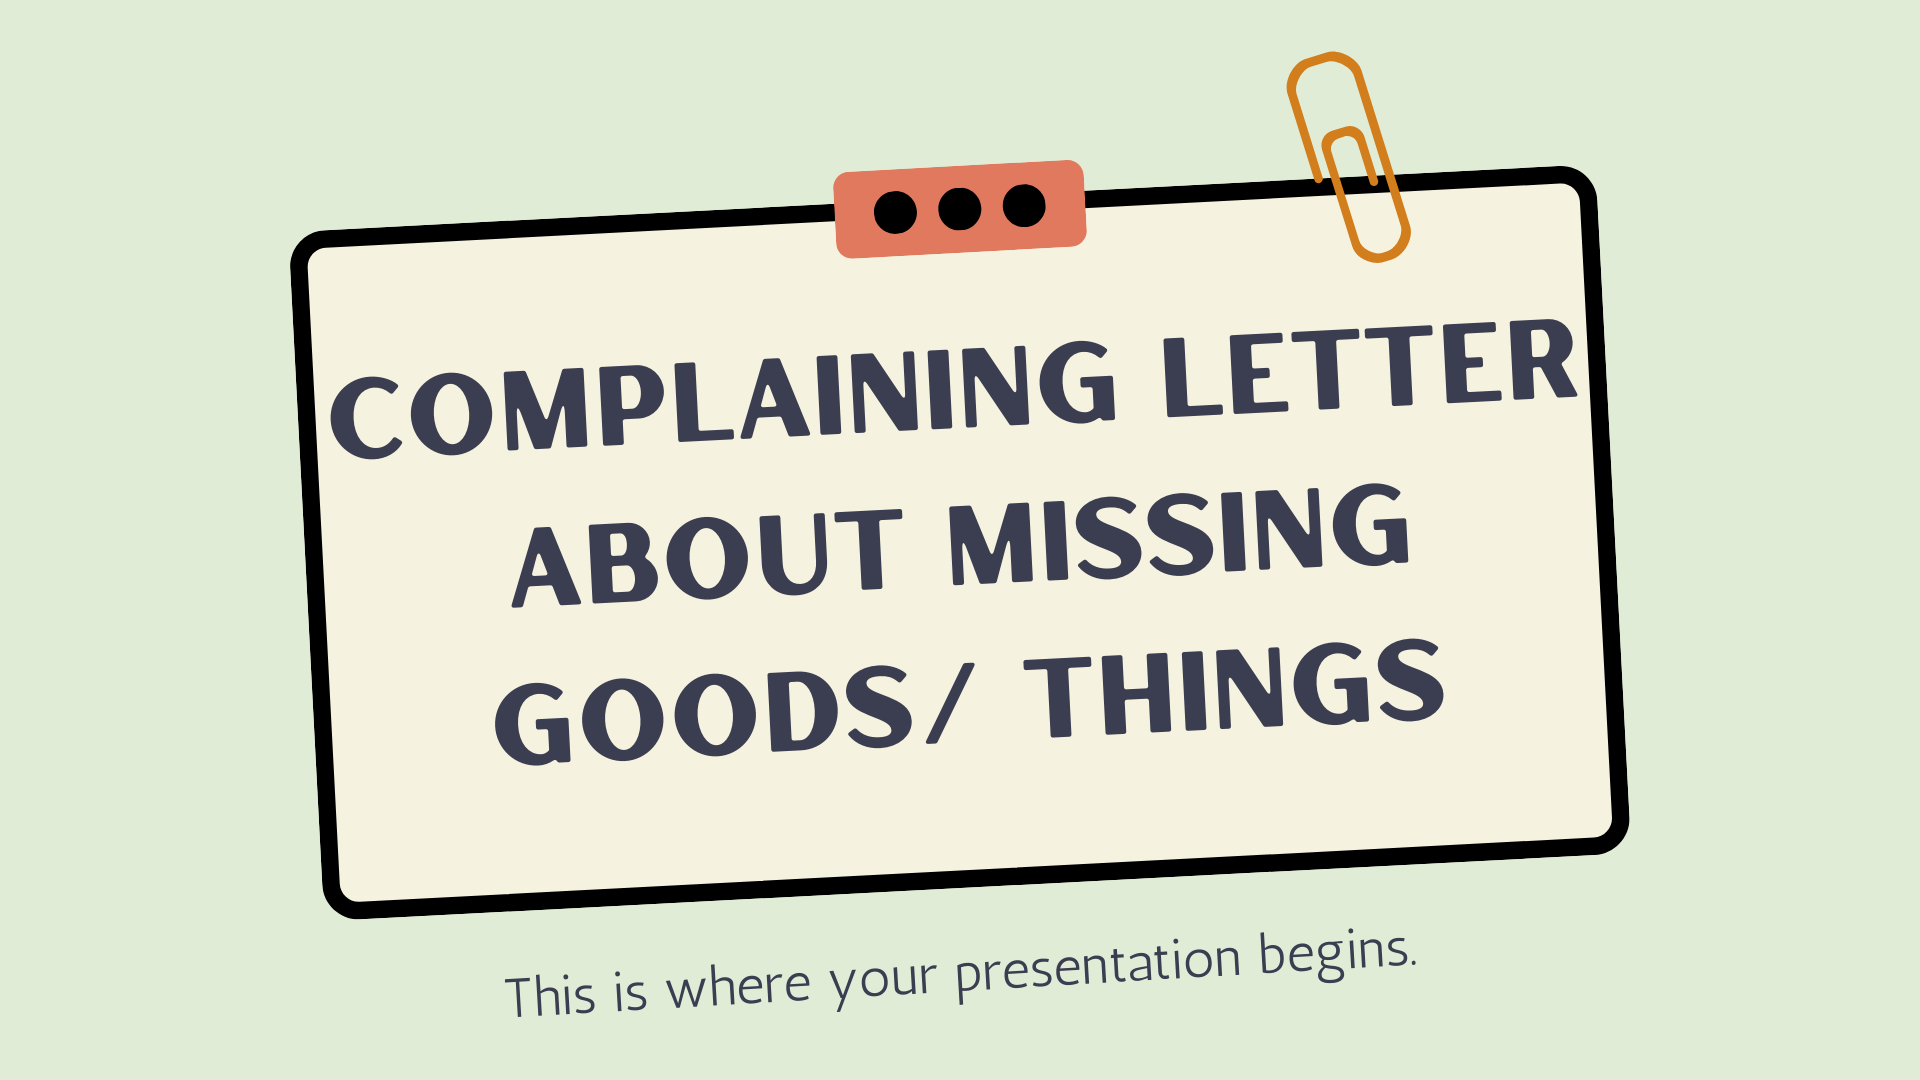 Complaining letter about missing goods things